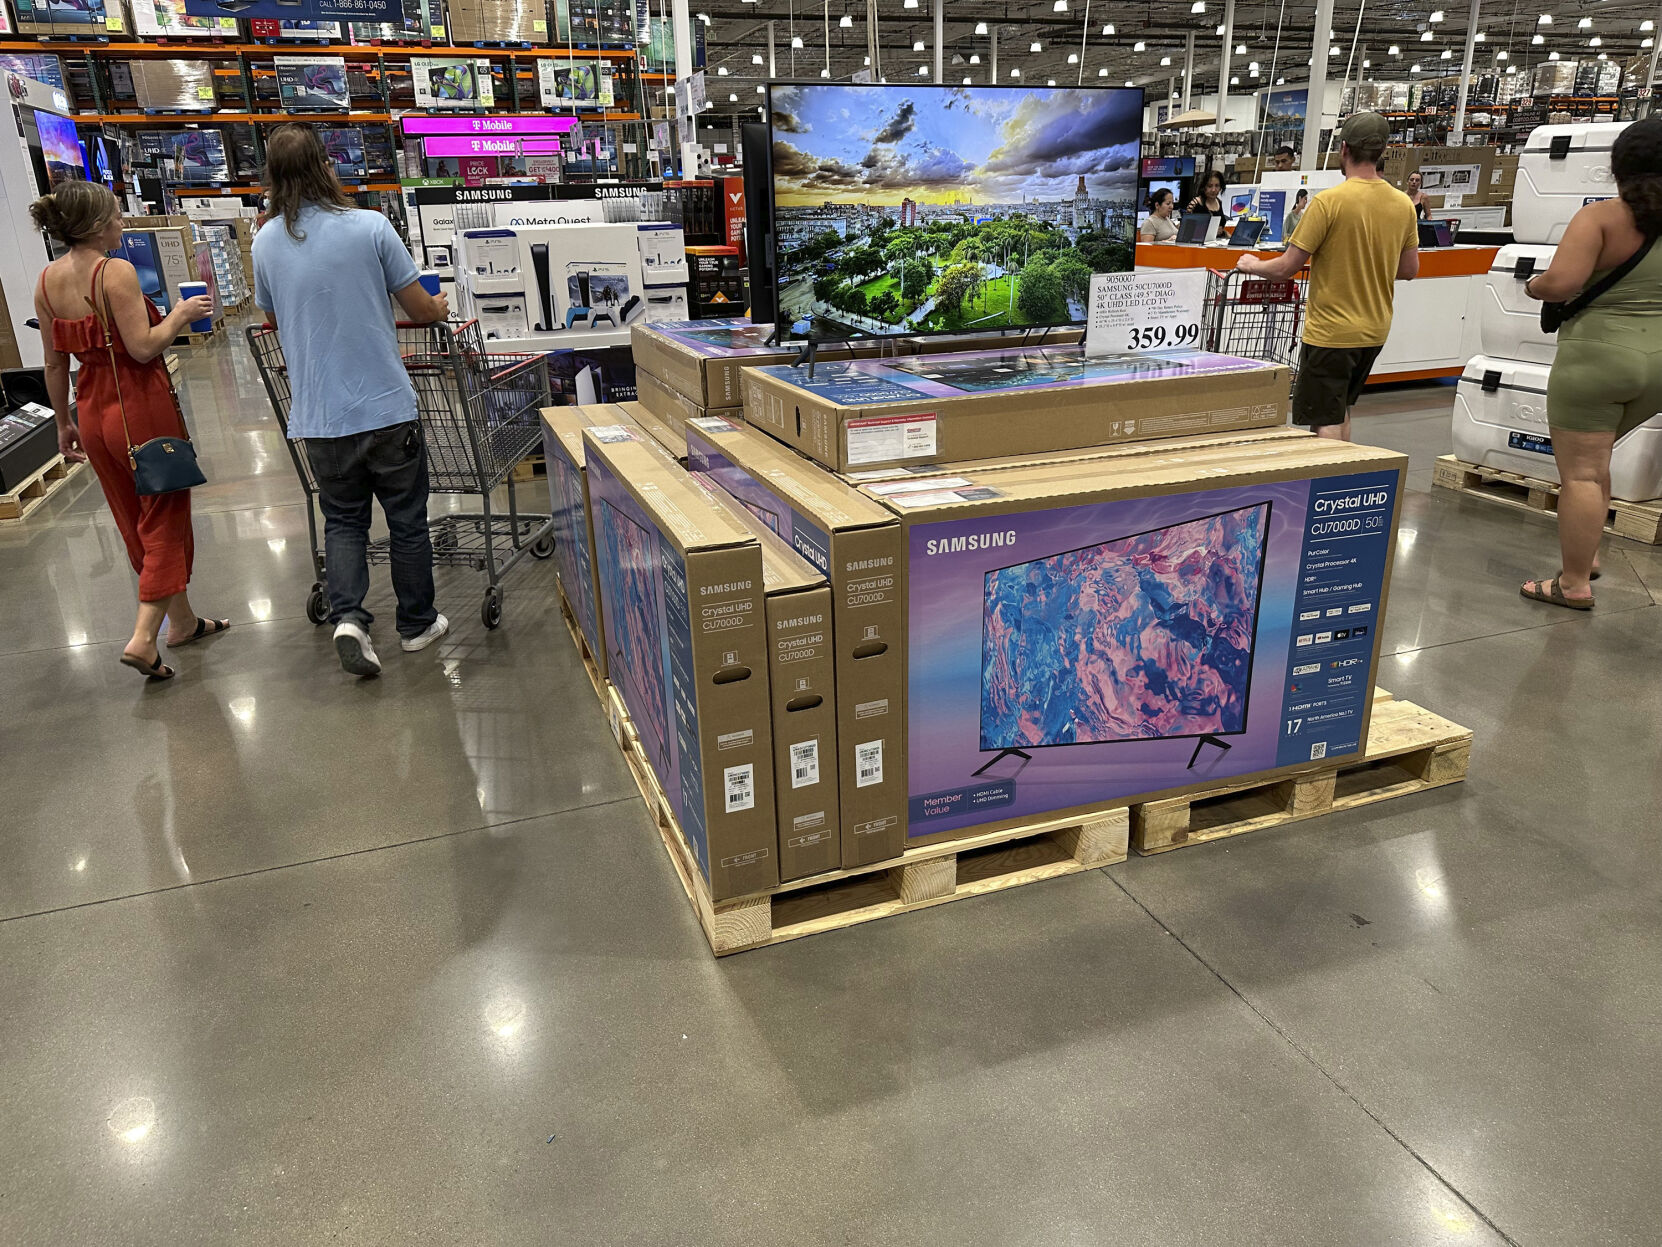 <p>Shoppers glide past a display of big-screen televisions in a Costco warehouse on Tuesday, July 11, 2023, in Sheridan, Colo. On Tuesday, July 18, the Commerce Department releases U.S. retail sales data for June. (AP Photo/David Zalubowski)</p>   PHOTO CREDIT: David Zalubowski 